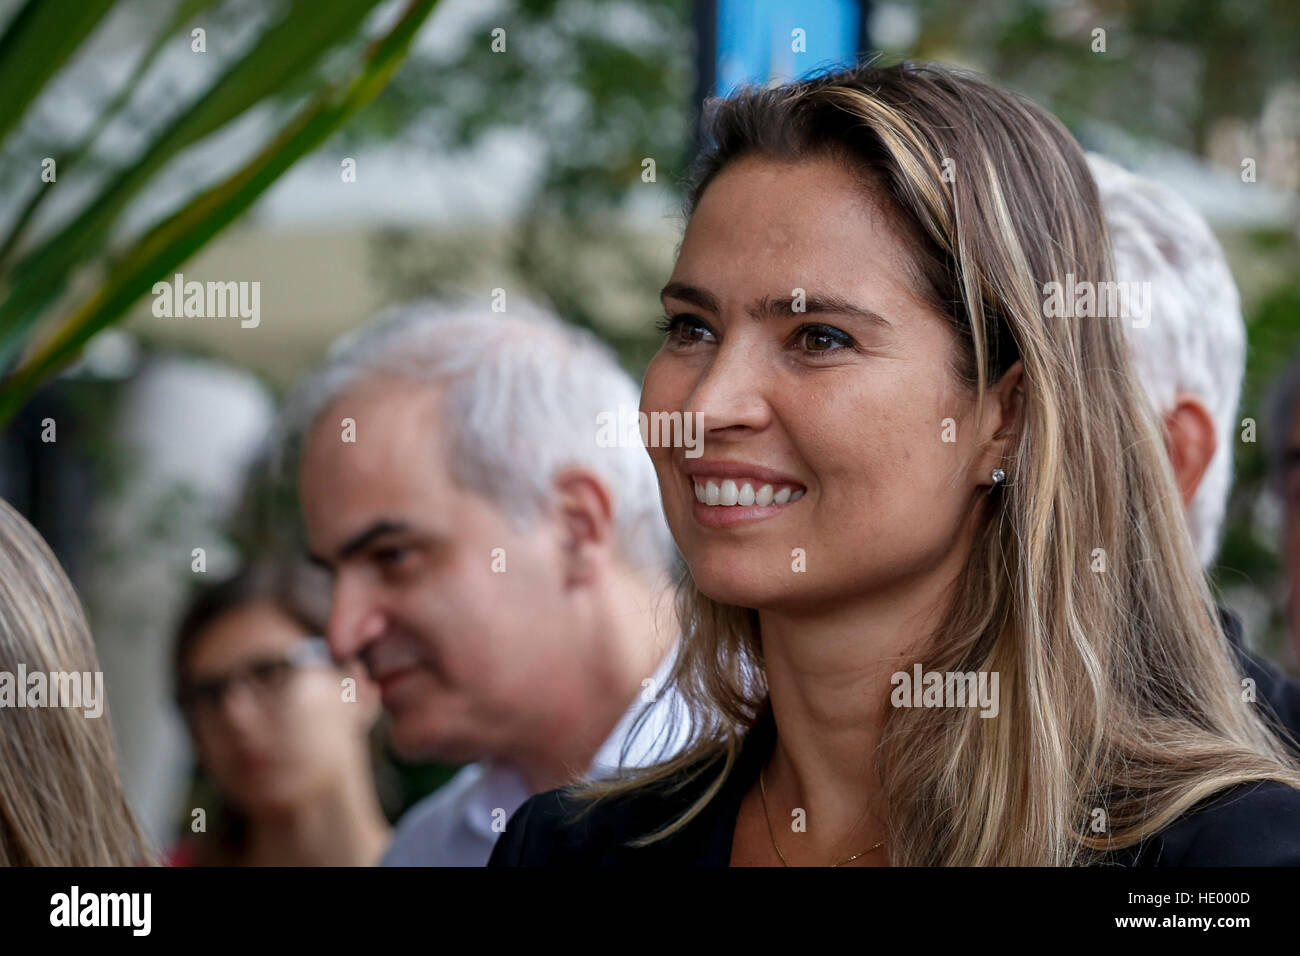 Rio De Janeiro, Brazil. 15th Dec, 2016. Isabel Swan, during the signing ceremony of the agreement between CBVela and BR Marinas, with homage to Olympic champions Martine Grael and Kunze Kahena held at Marina da Glória, in Rio de Janeiro, RJ. © André Horta/FotoArena/Alamy Live News Stock Photo